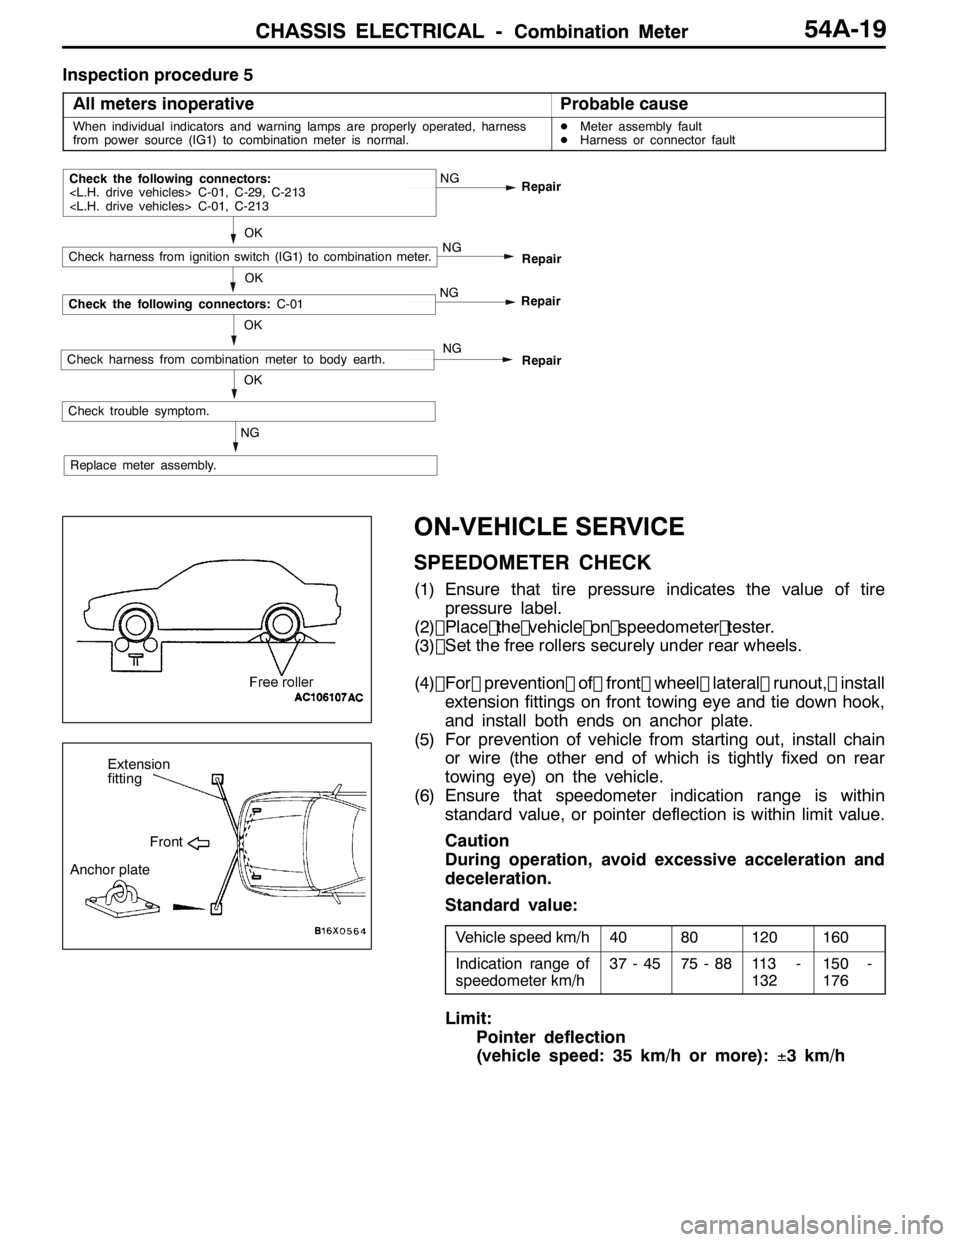 MITSUBISHI LANCER EVOLUTION 2007  Service Repair Manual CHASSIS ELECTRICAL -Combination MeterCHASSIS ELECTRICAL -Combination Meter54A-19
Inspection procedure 5All meters inoperative
Probable cause
When individual indicators and warning lamps are properly o